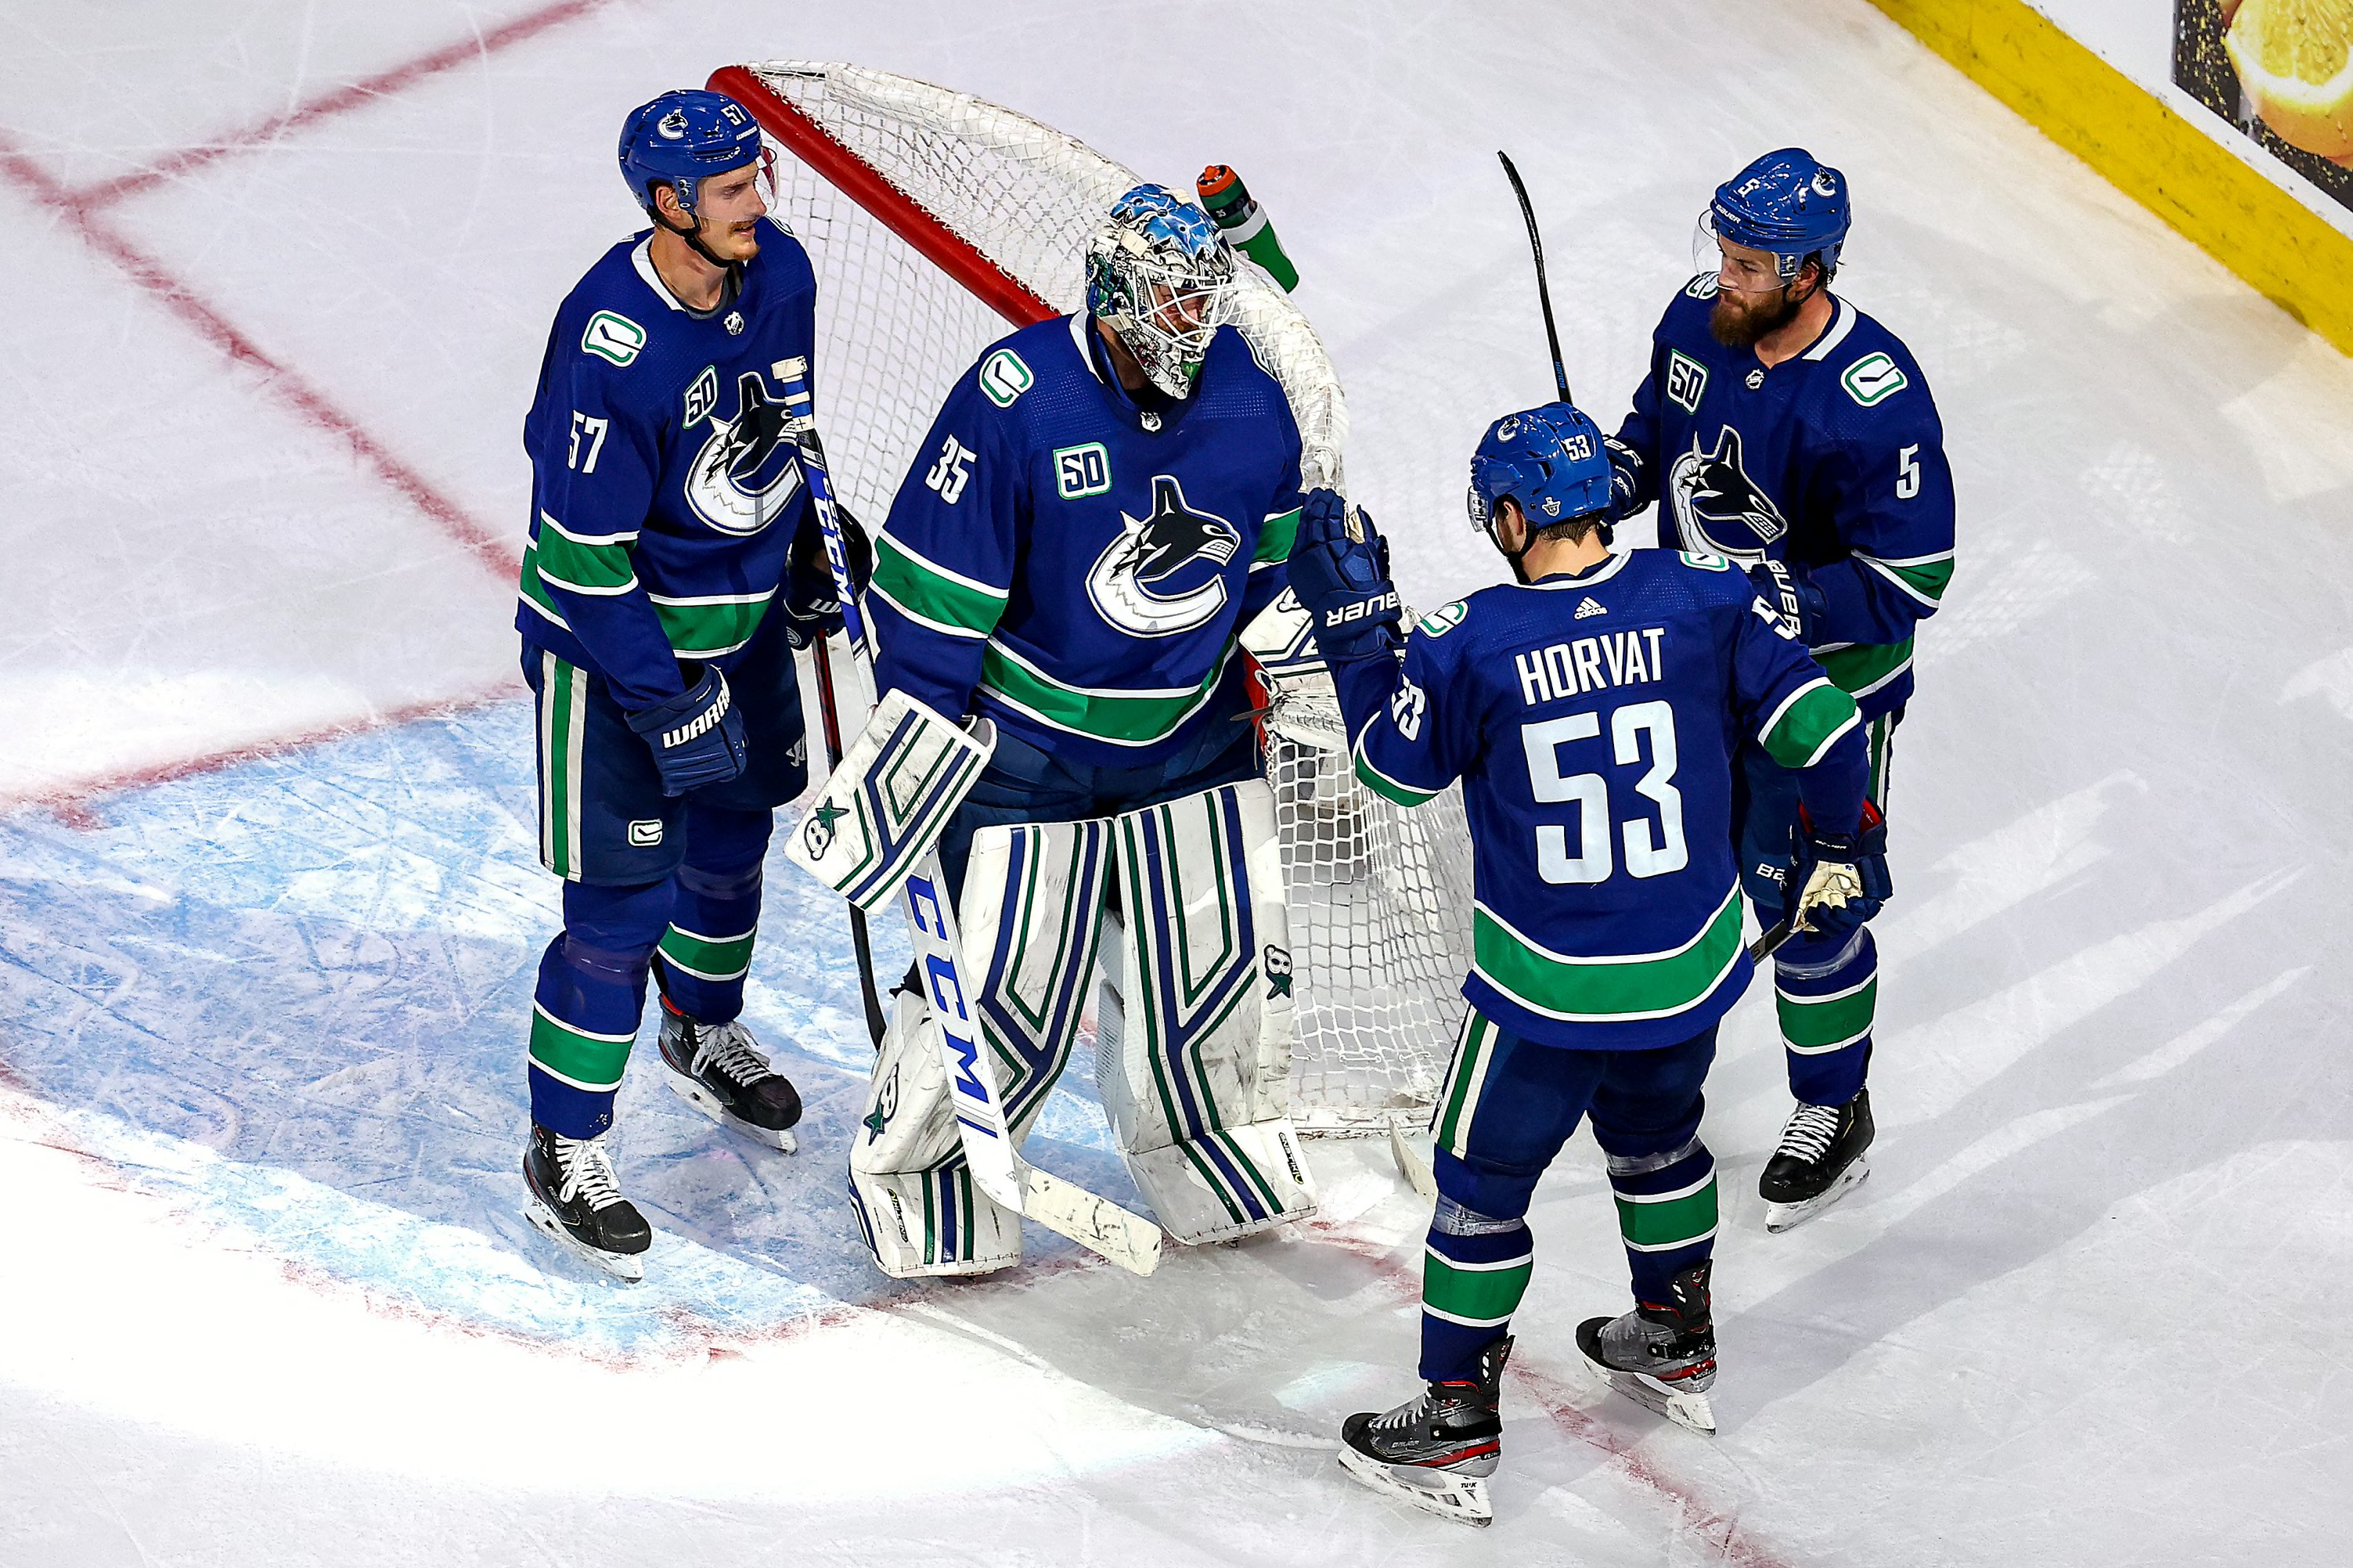 Vancouver Canucks: 2019/2020 Reflections